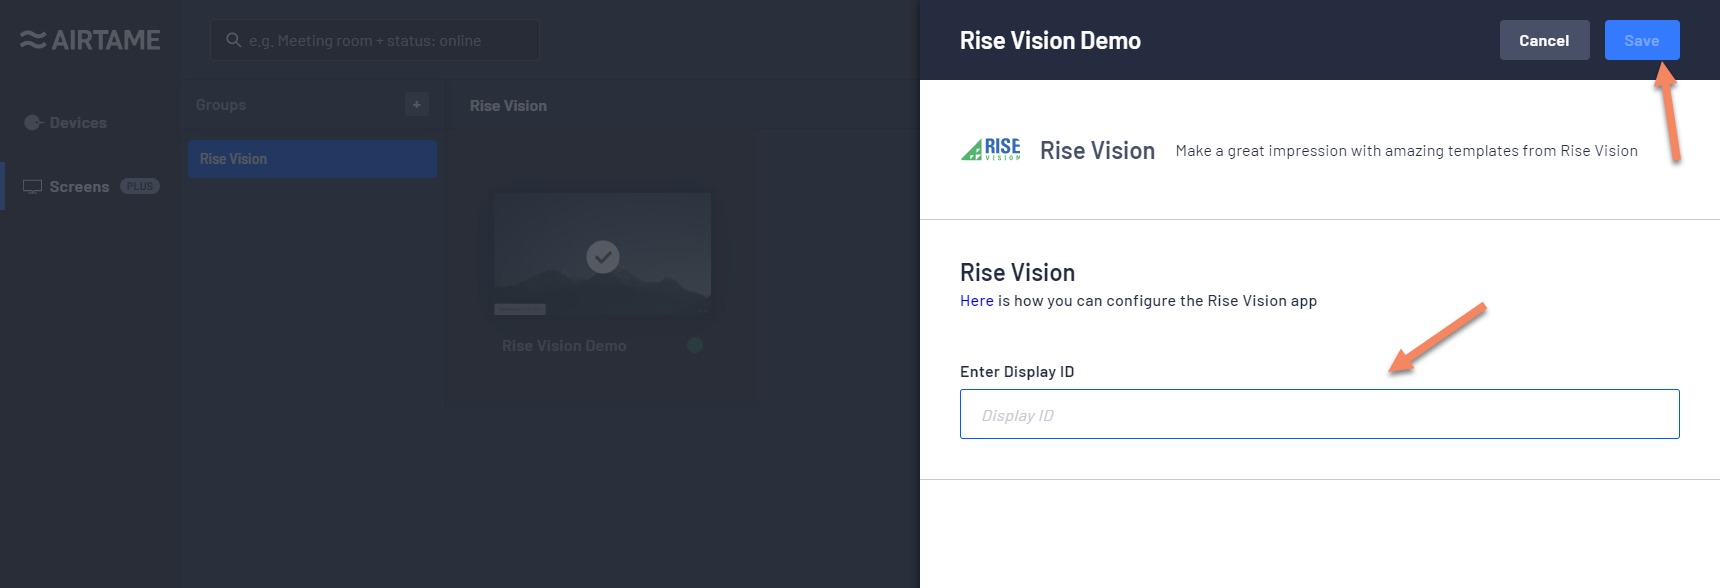 airtame-rise-vision-content-settings5.png